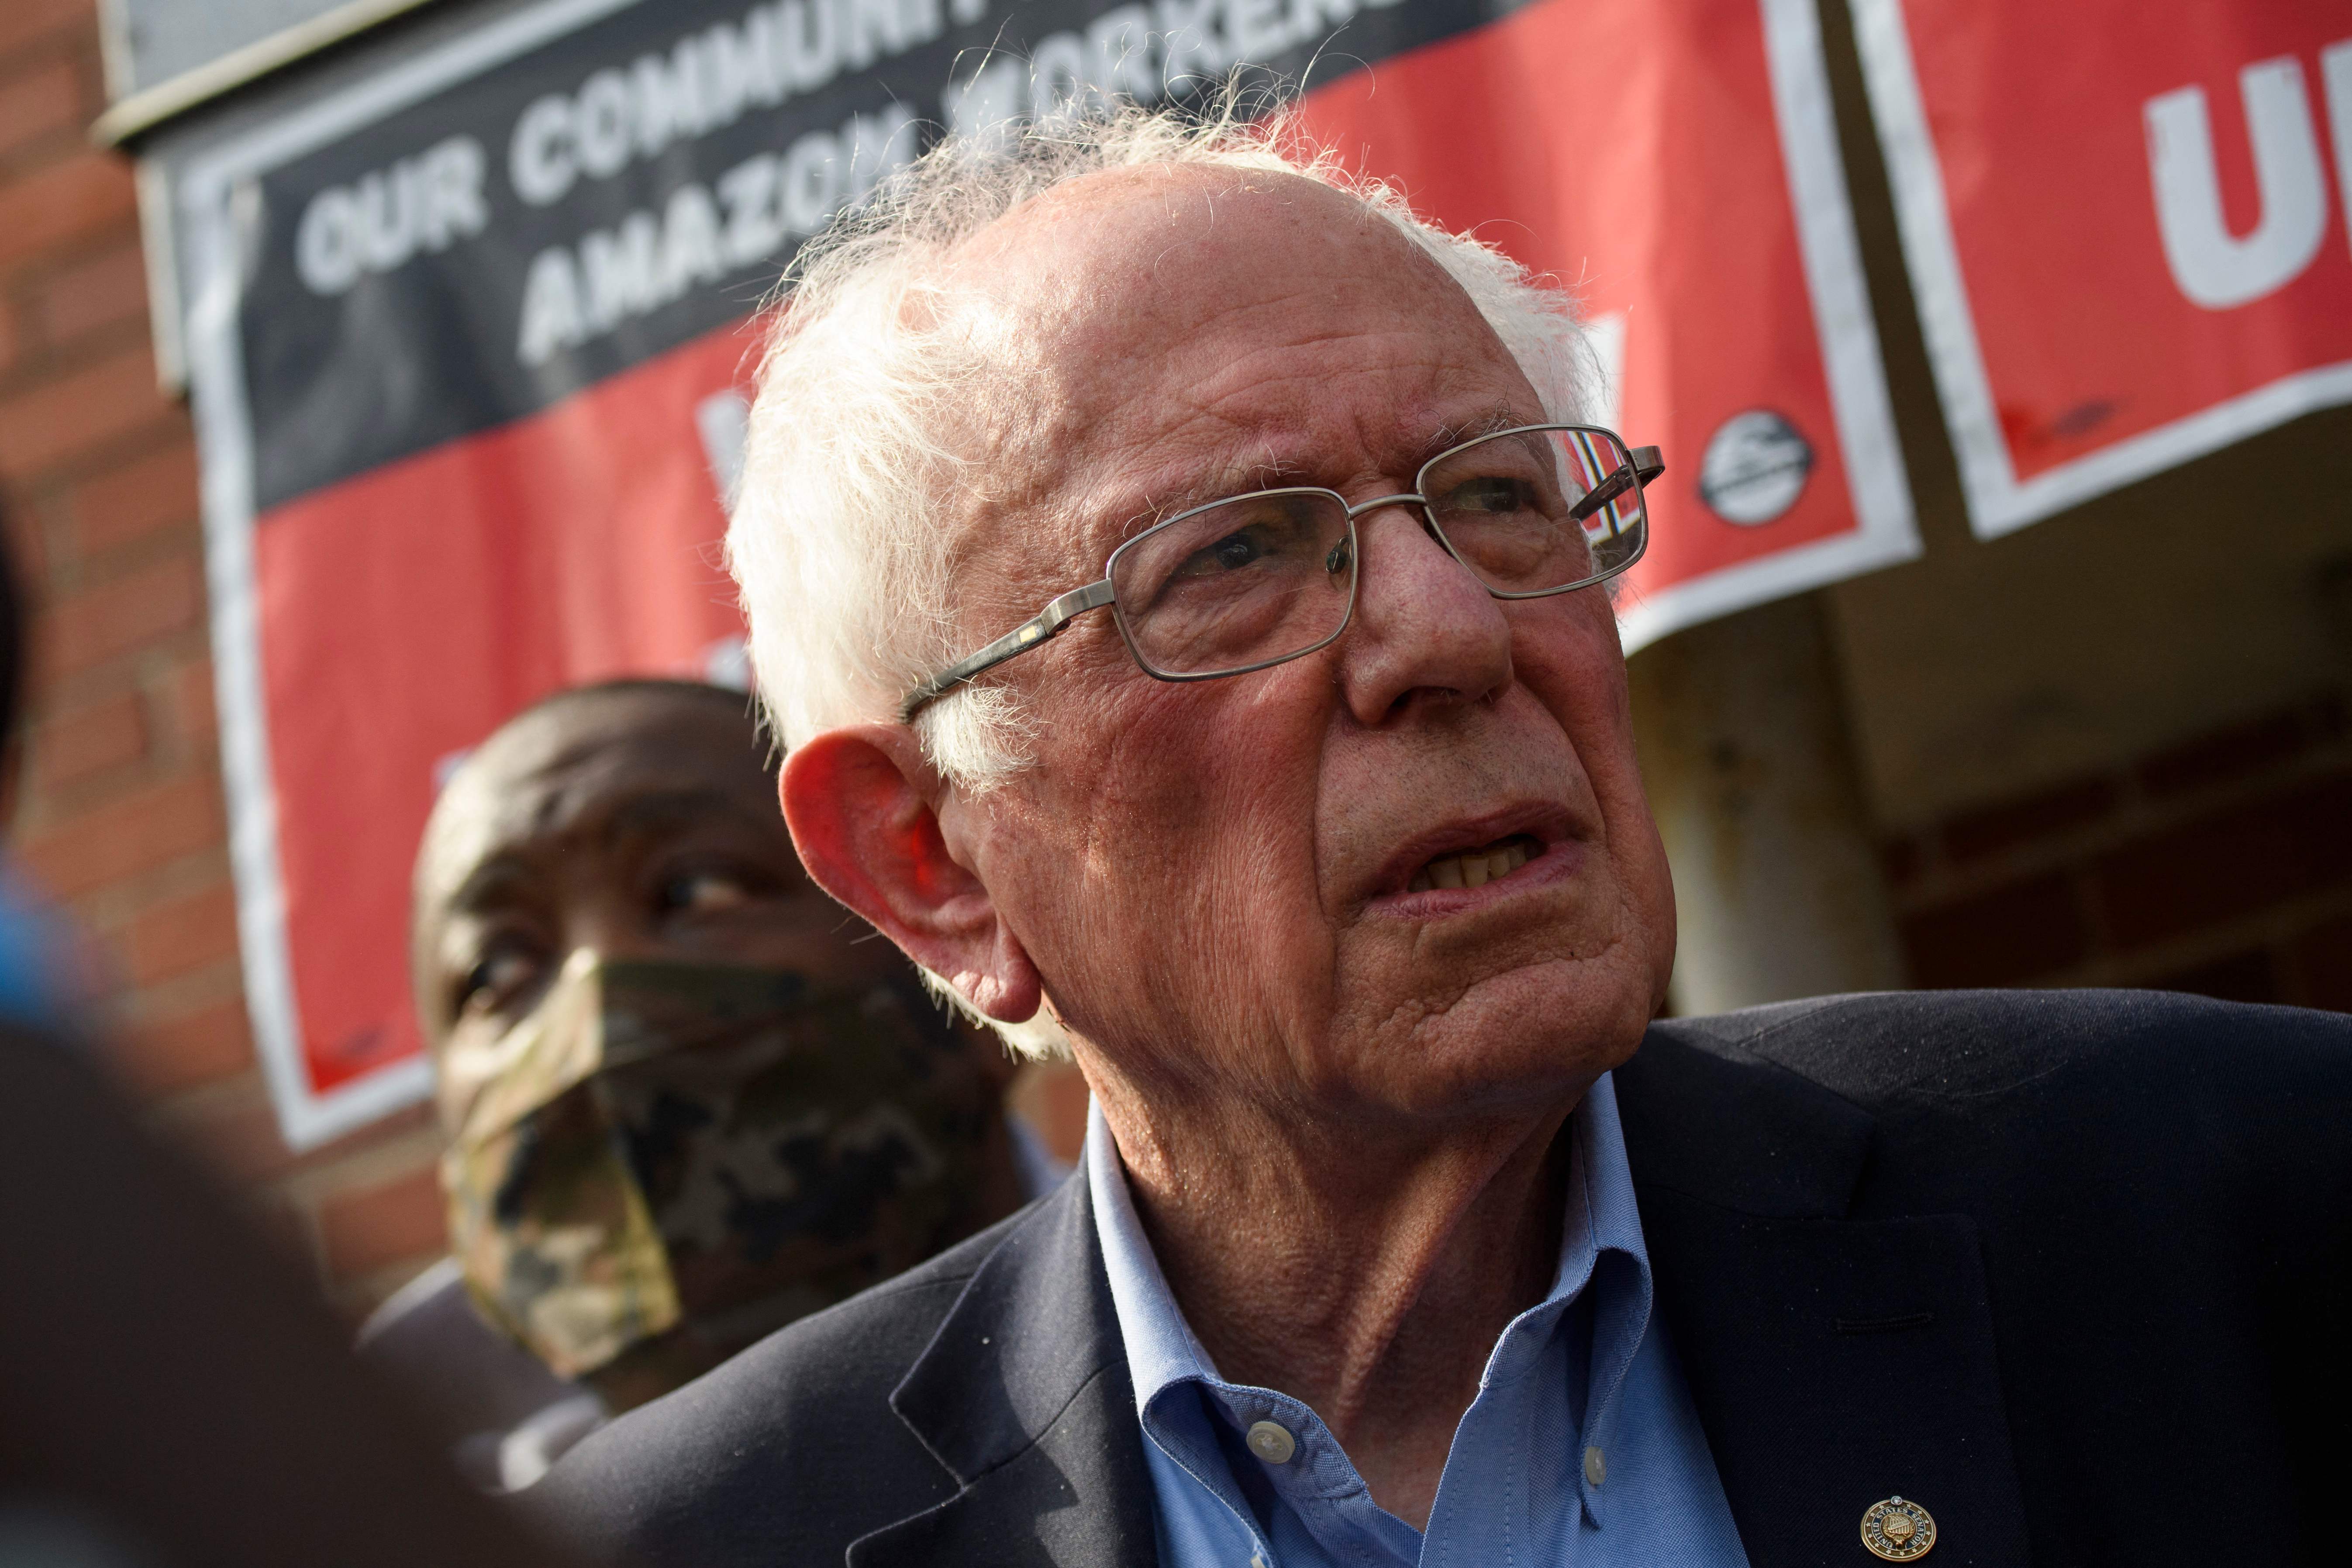 Bernie Sanders’ love of a big bed has been routinely mocked online